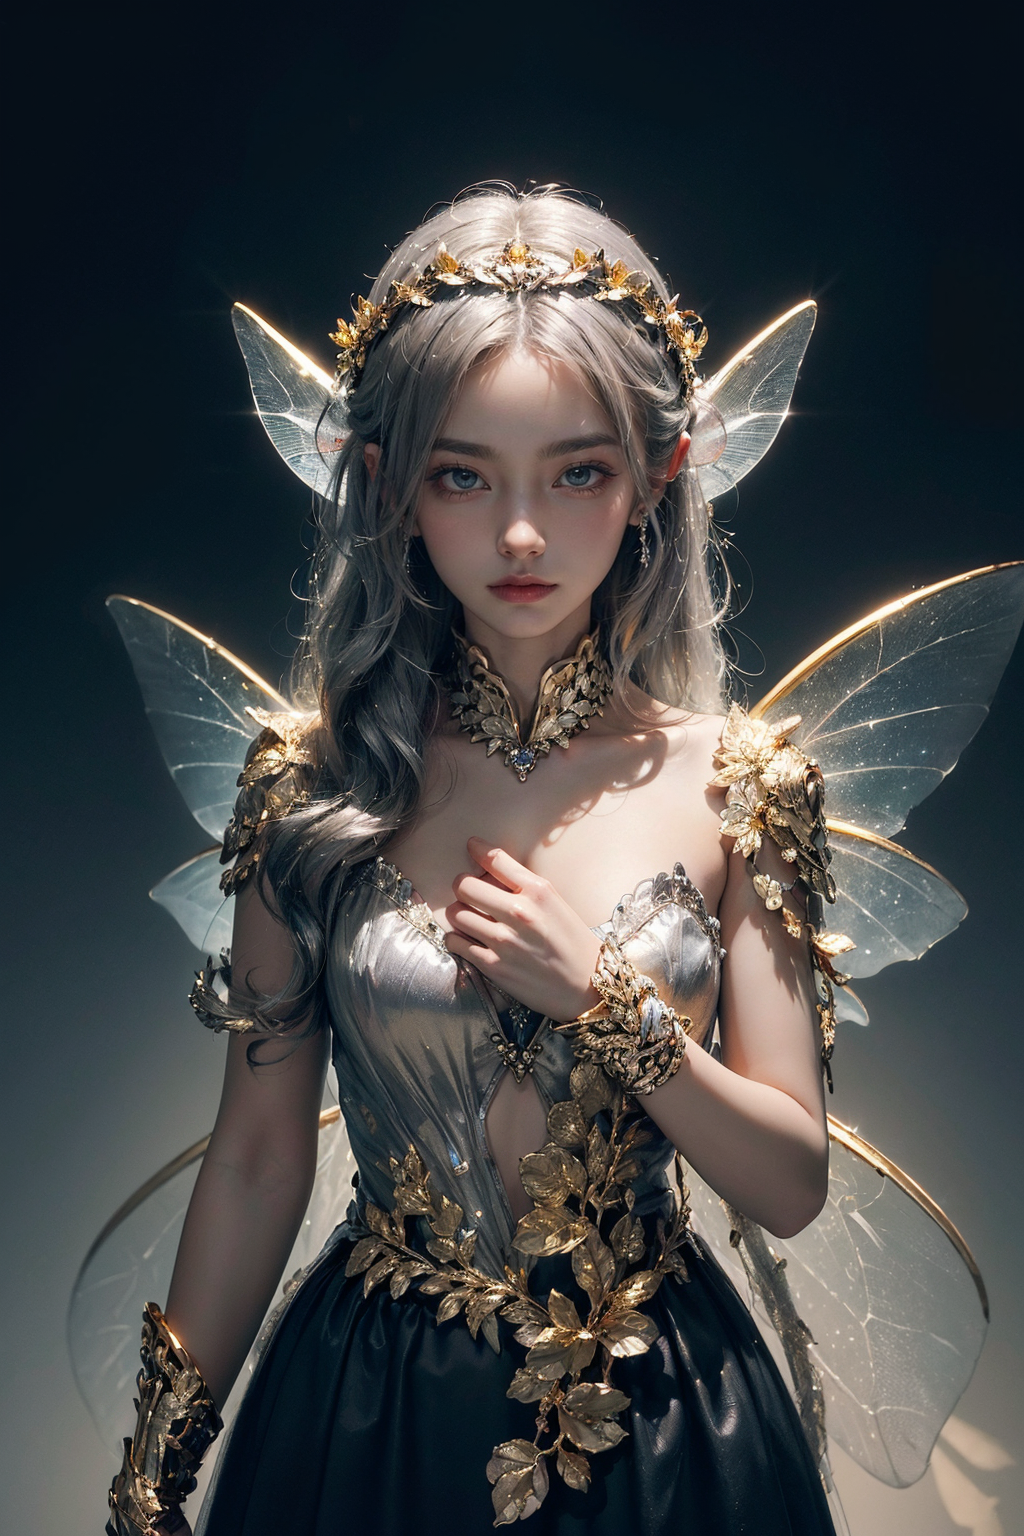 (((gold, silver, glimmer)), faerie), limited palette, contrast, phenomenal aesthetic, best quality, sumptuous artwork